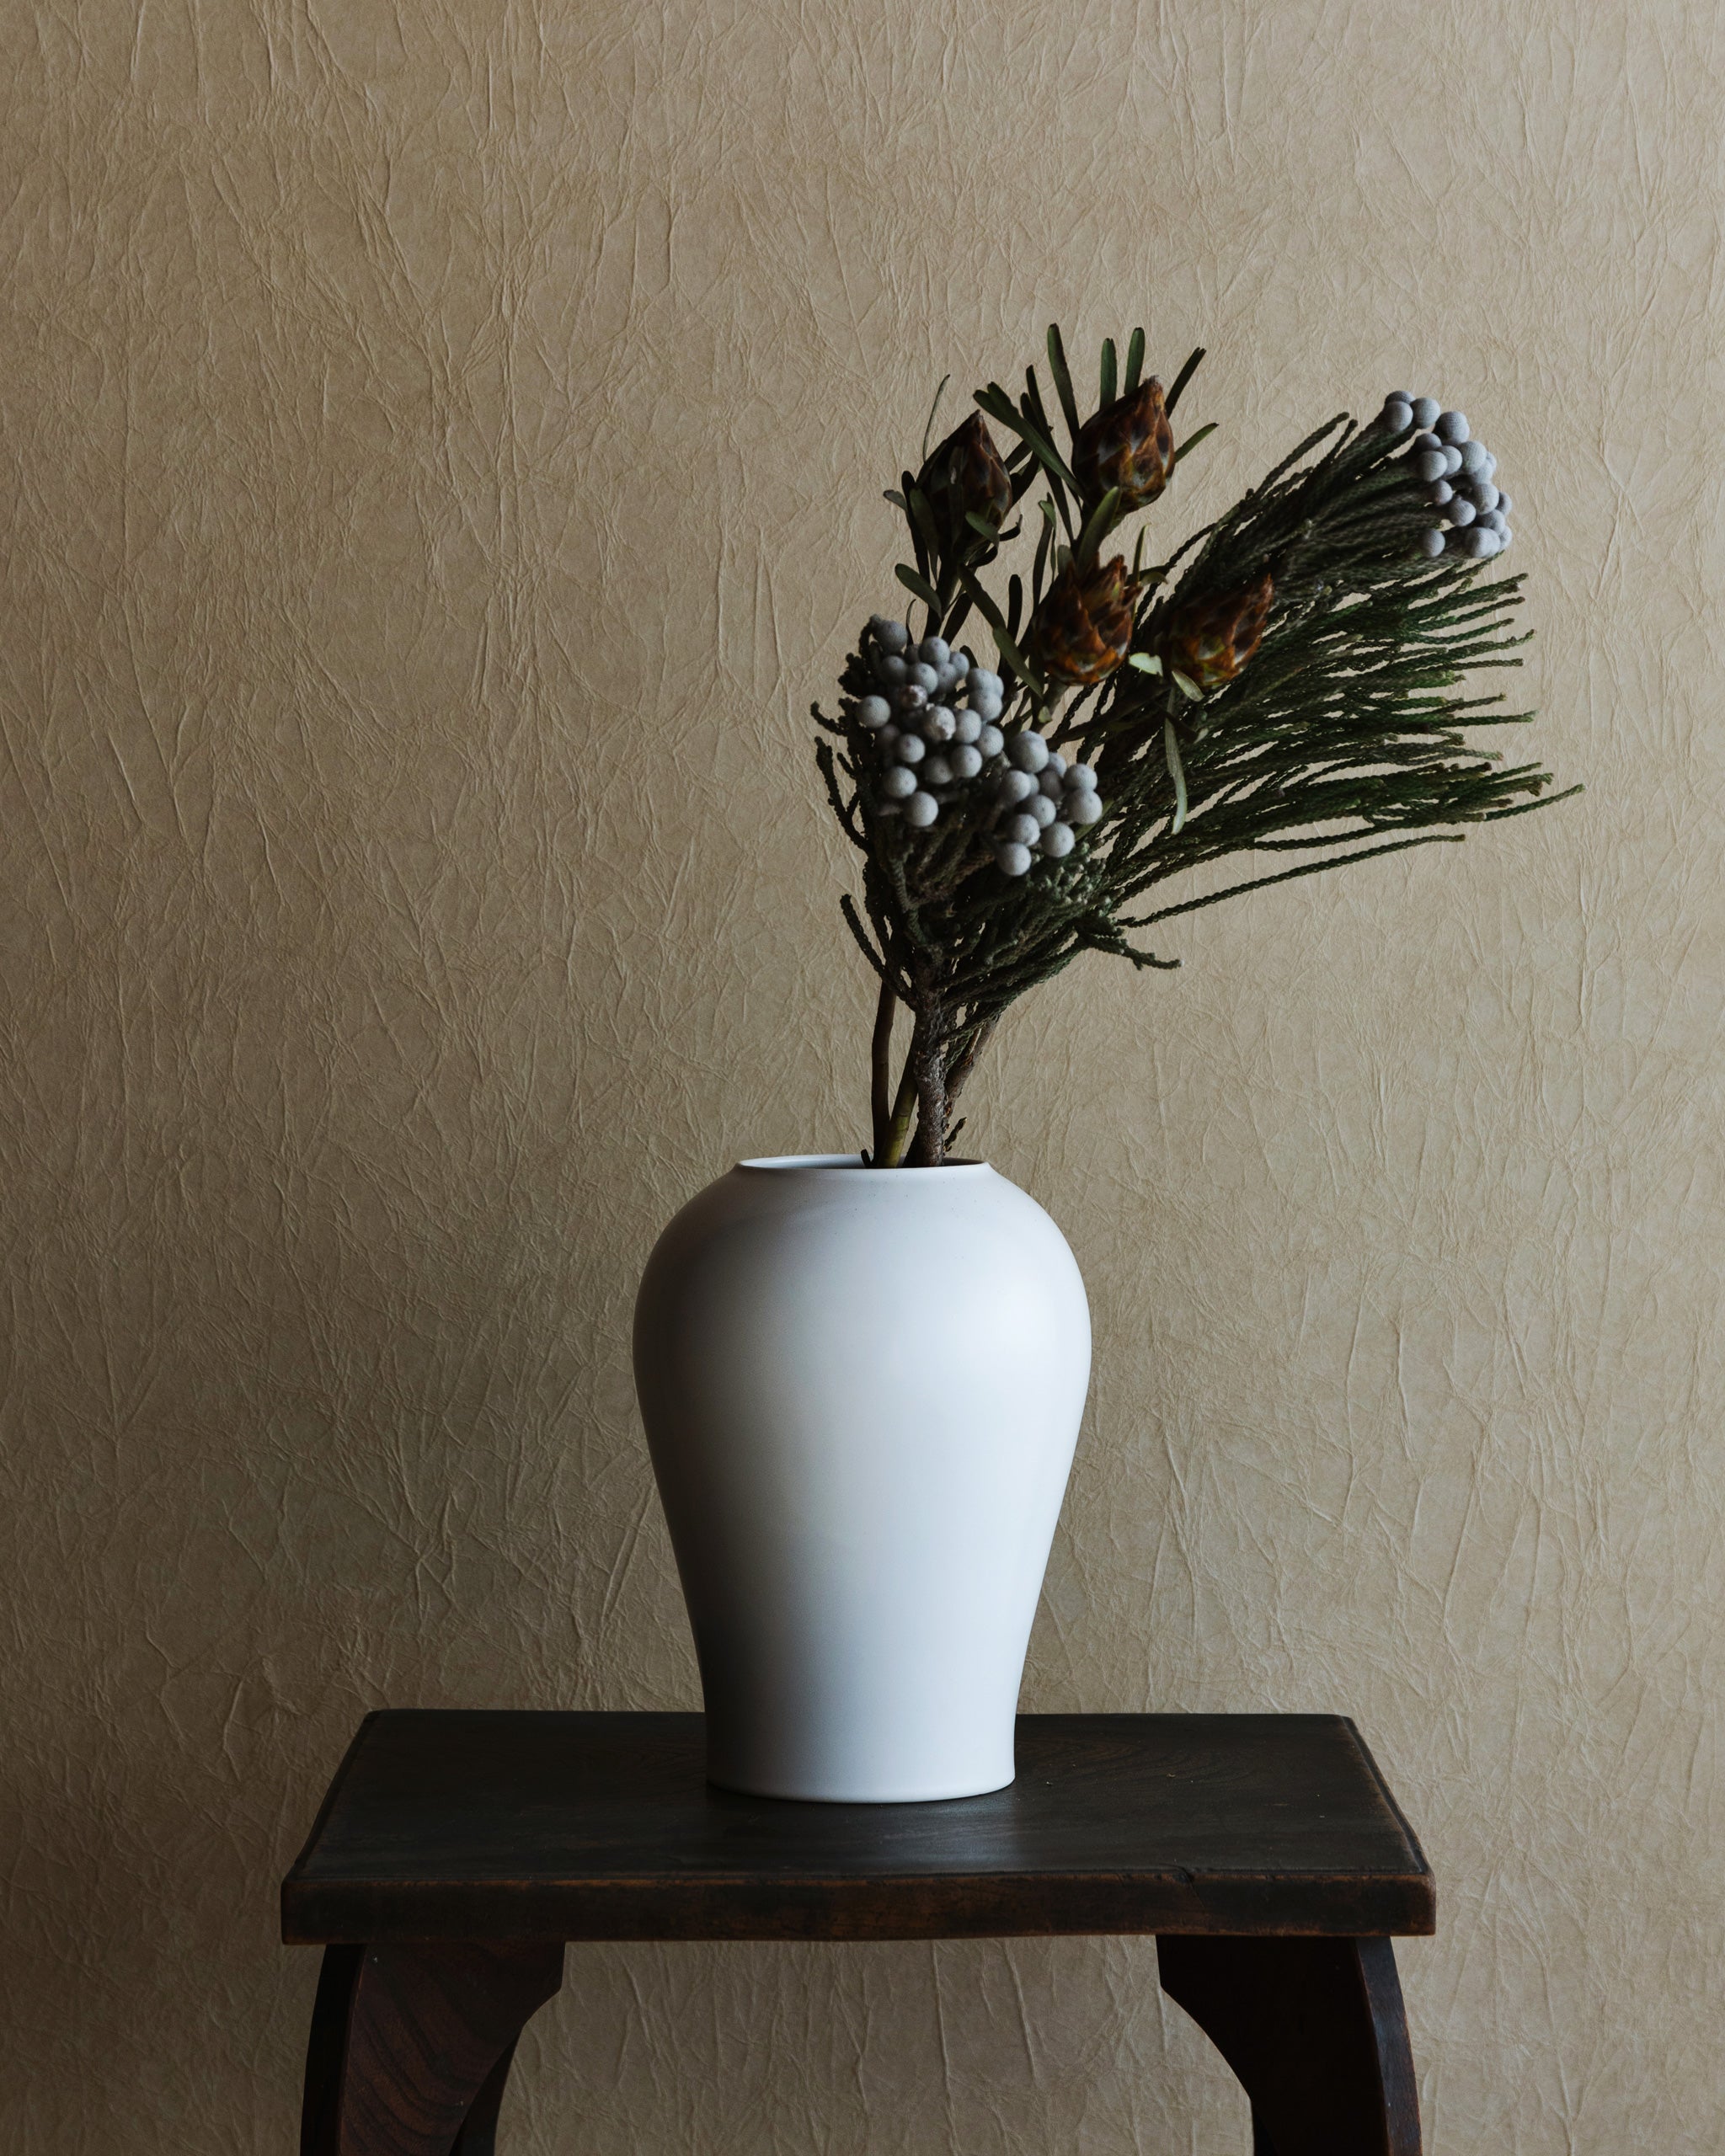 Large heishi vase placed on top of a dark brown wood stool with green branches in it.